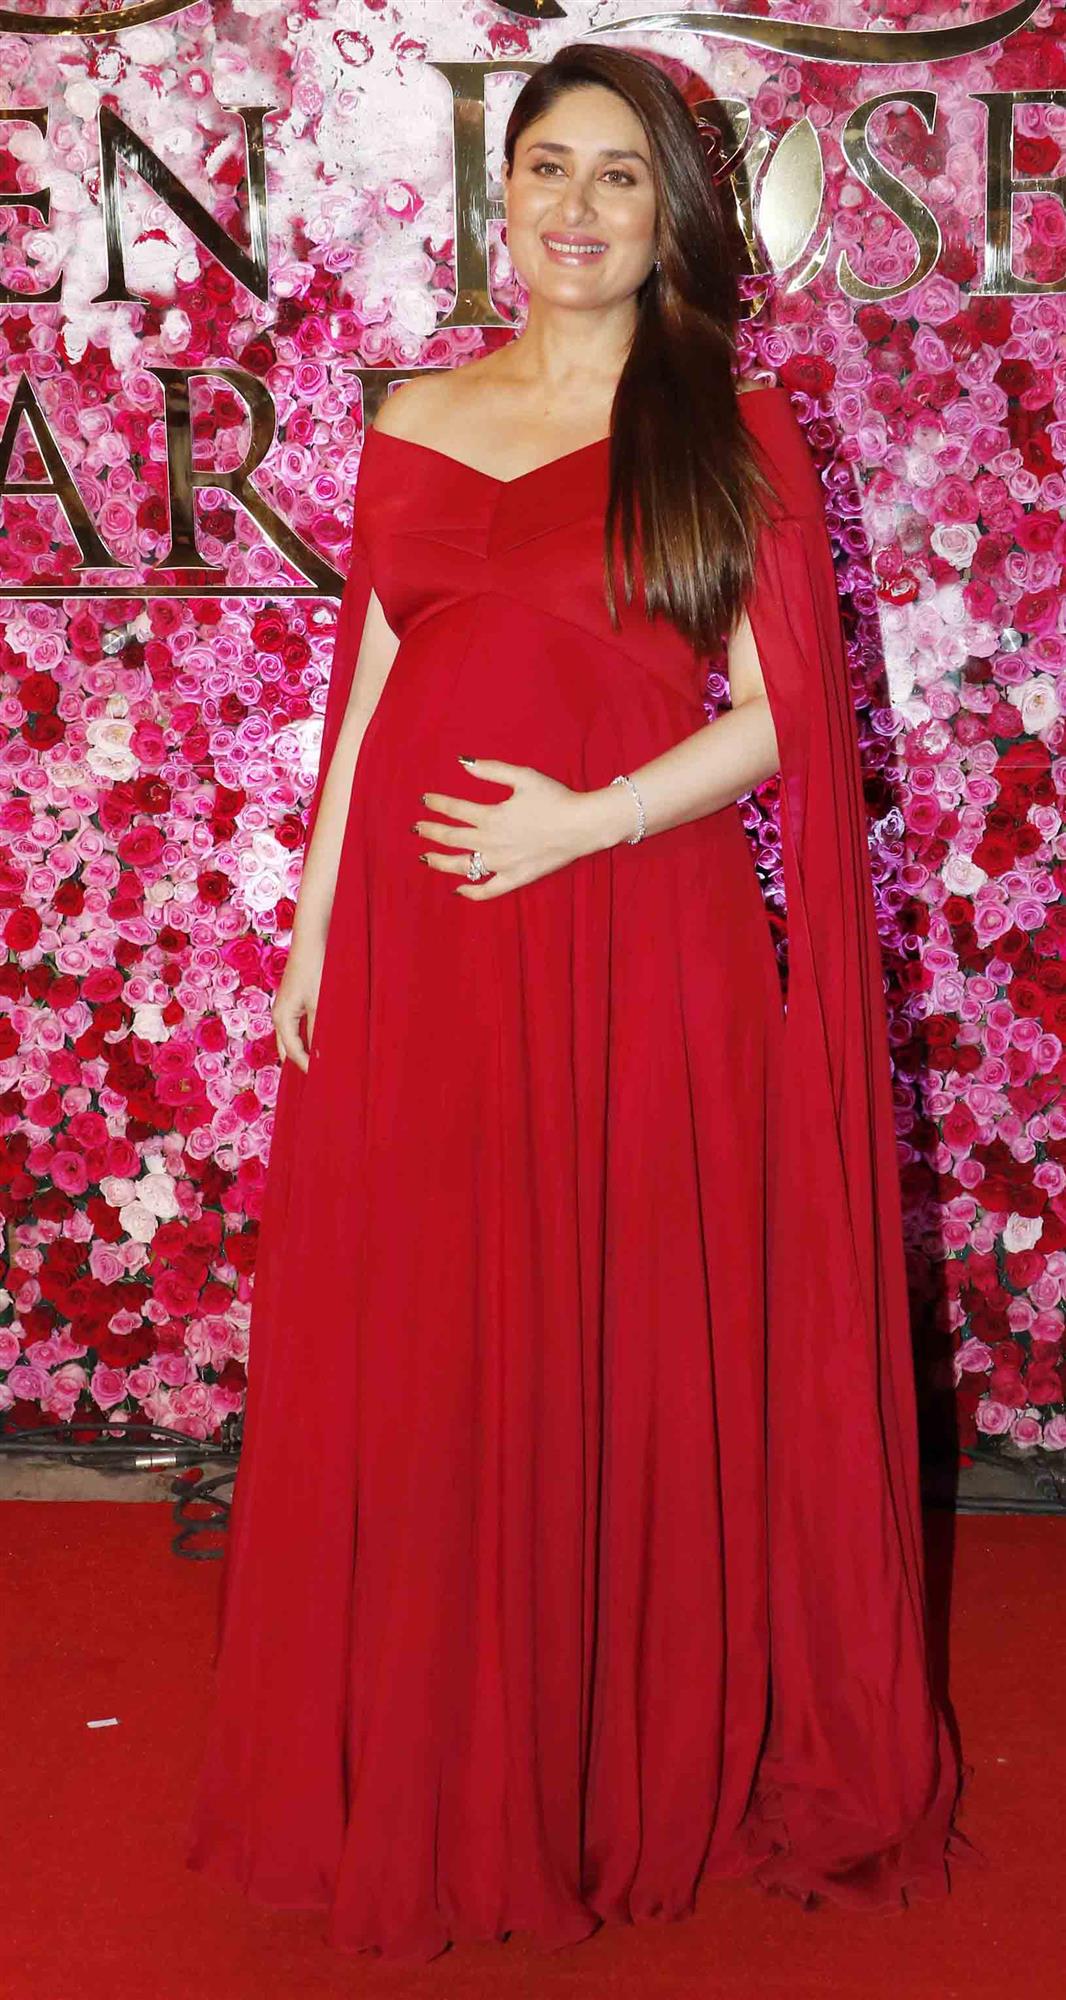 Kareena is looking gorgeous in this loose red dress.